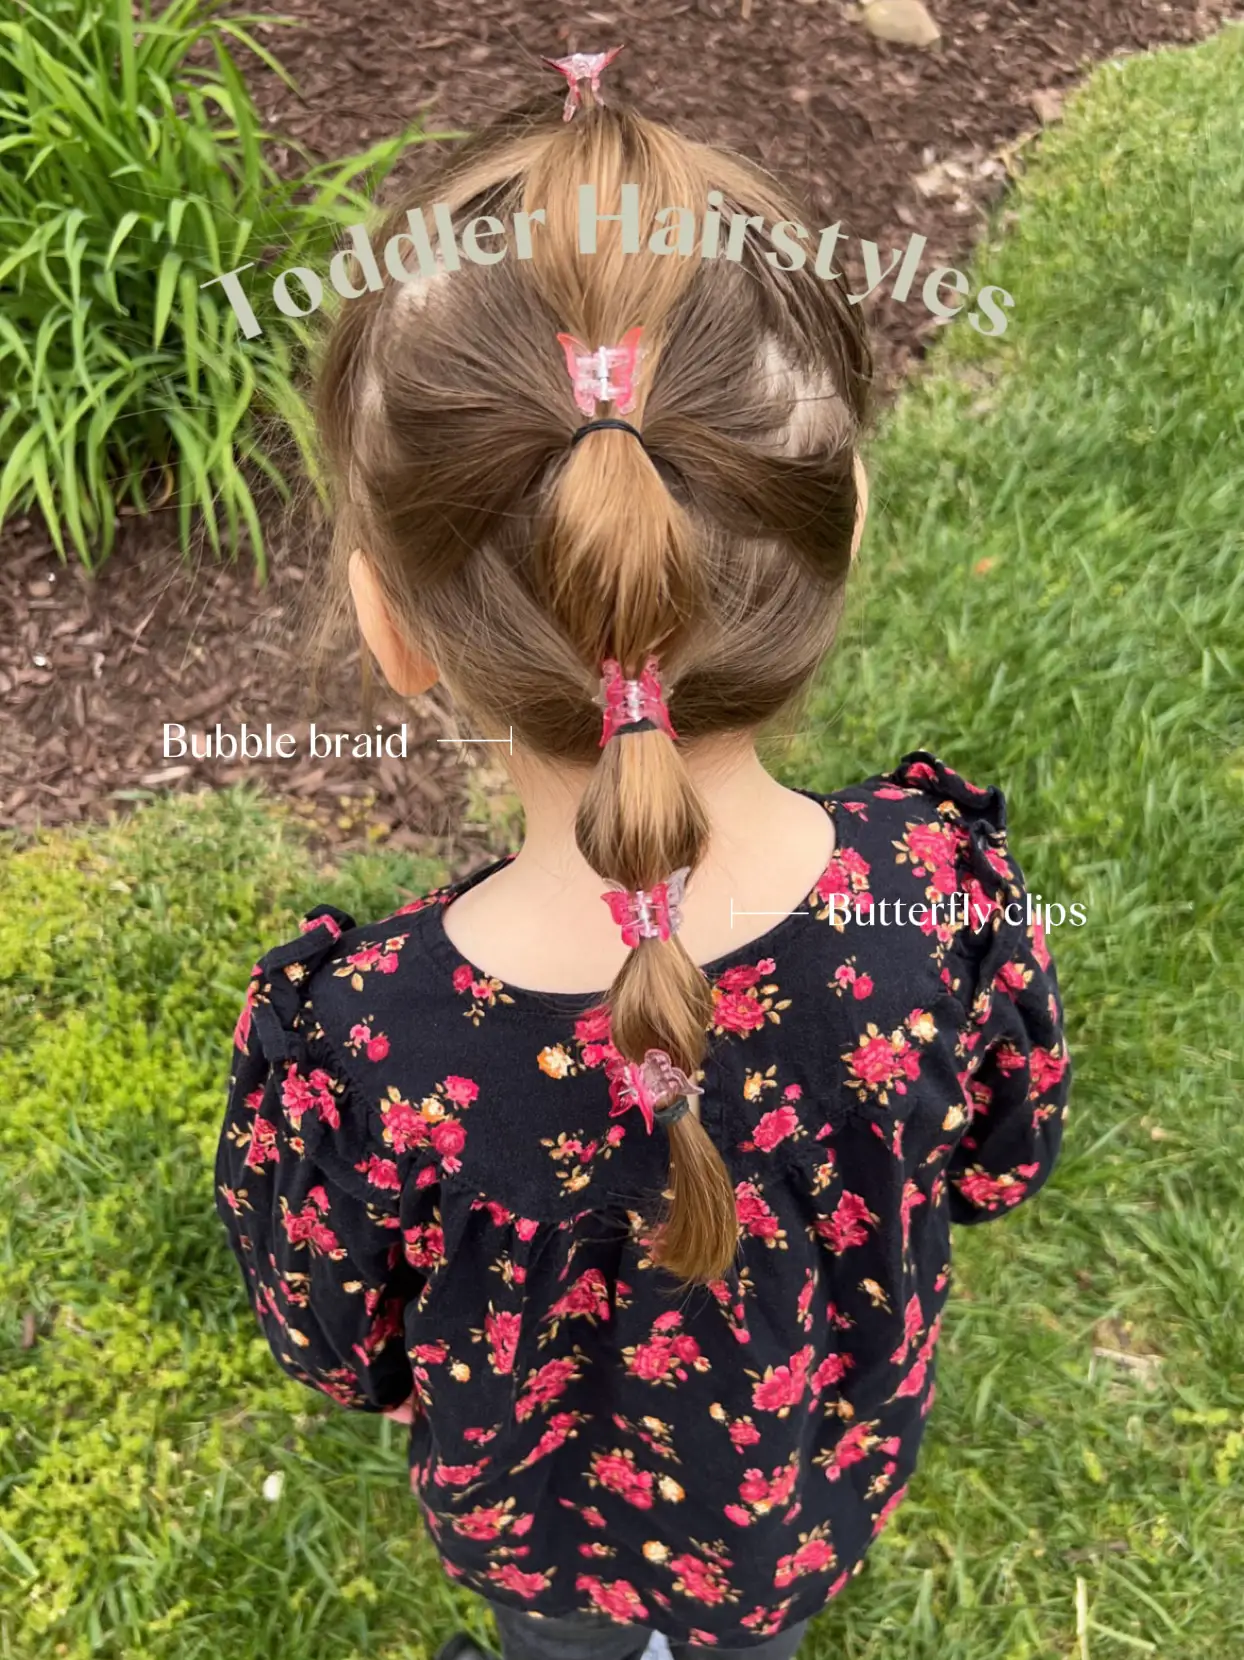 Kids hairstyles with beads to try! #hairstyle #fyp #biracialkids